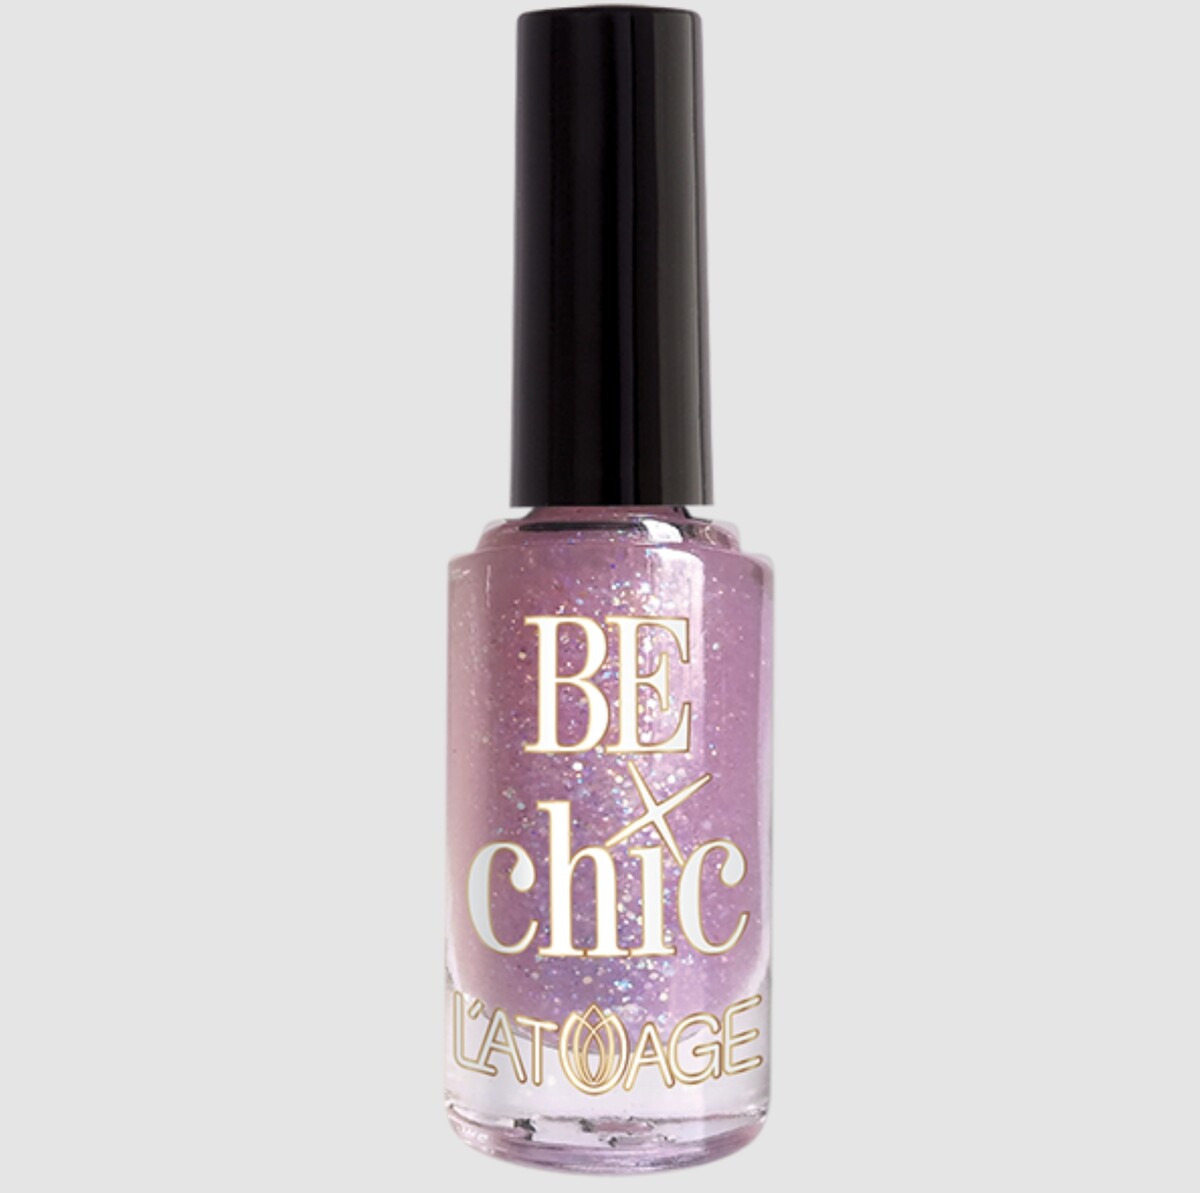    be chic  707 8, 5 - 